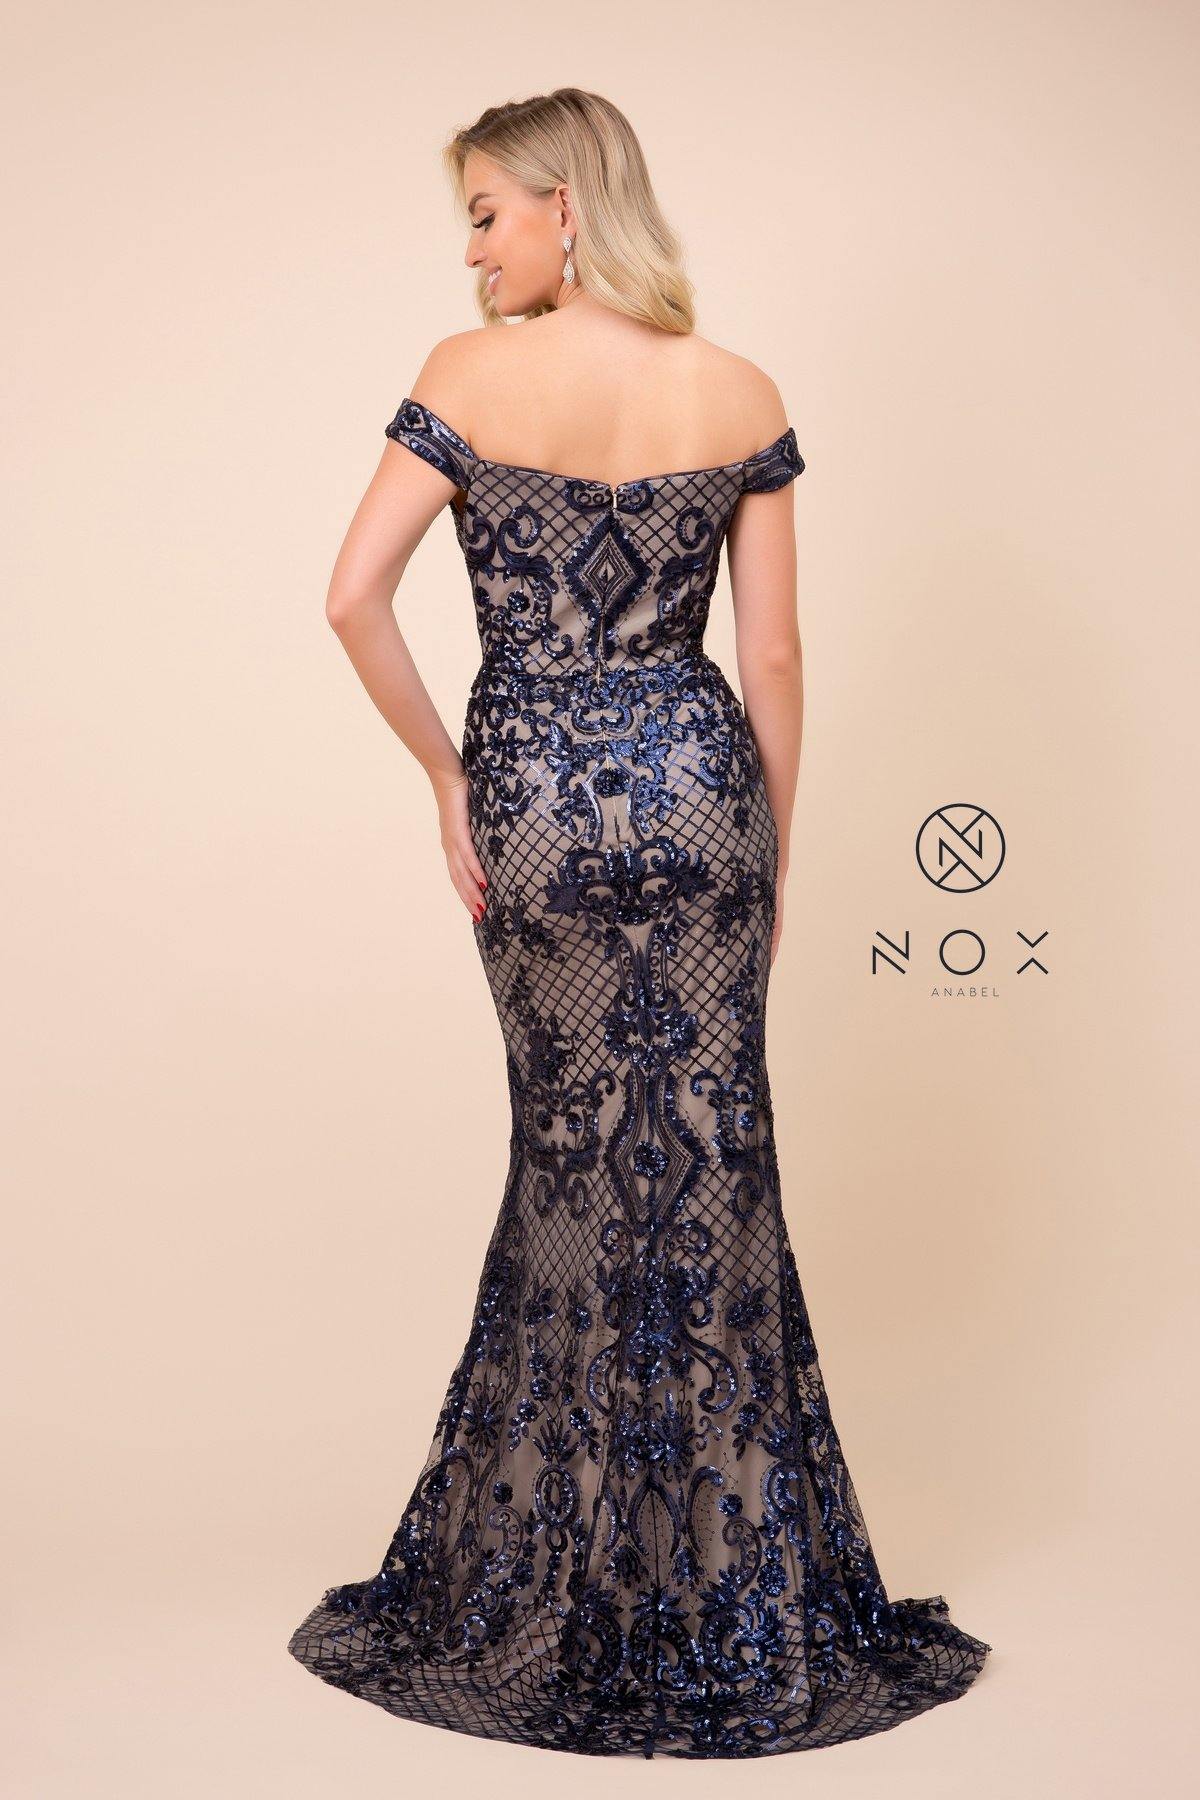 Sequin Embroidered Long Fitted Prom Dress - The Dress Outlet Nox Anabel